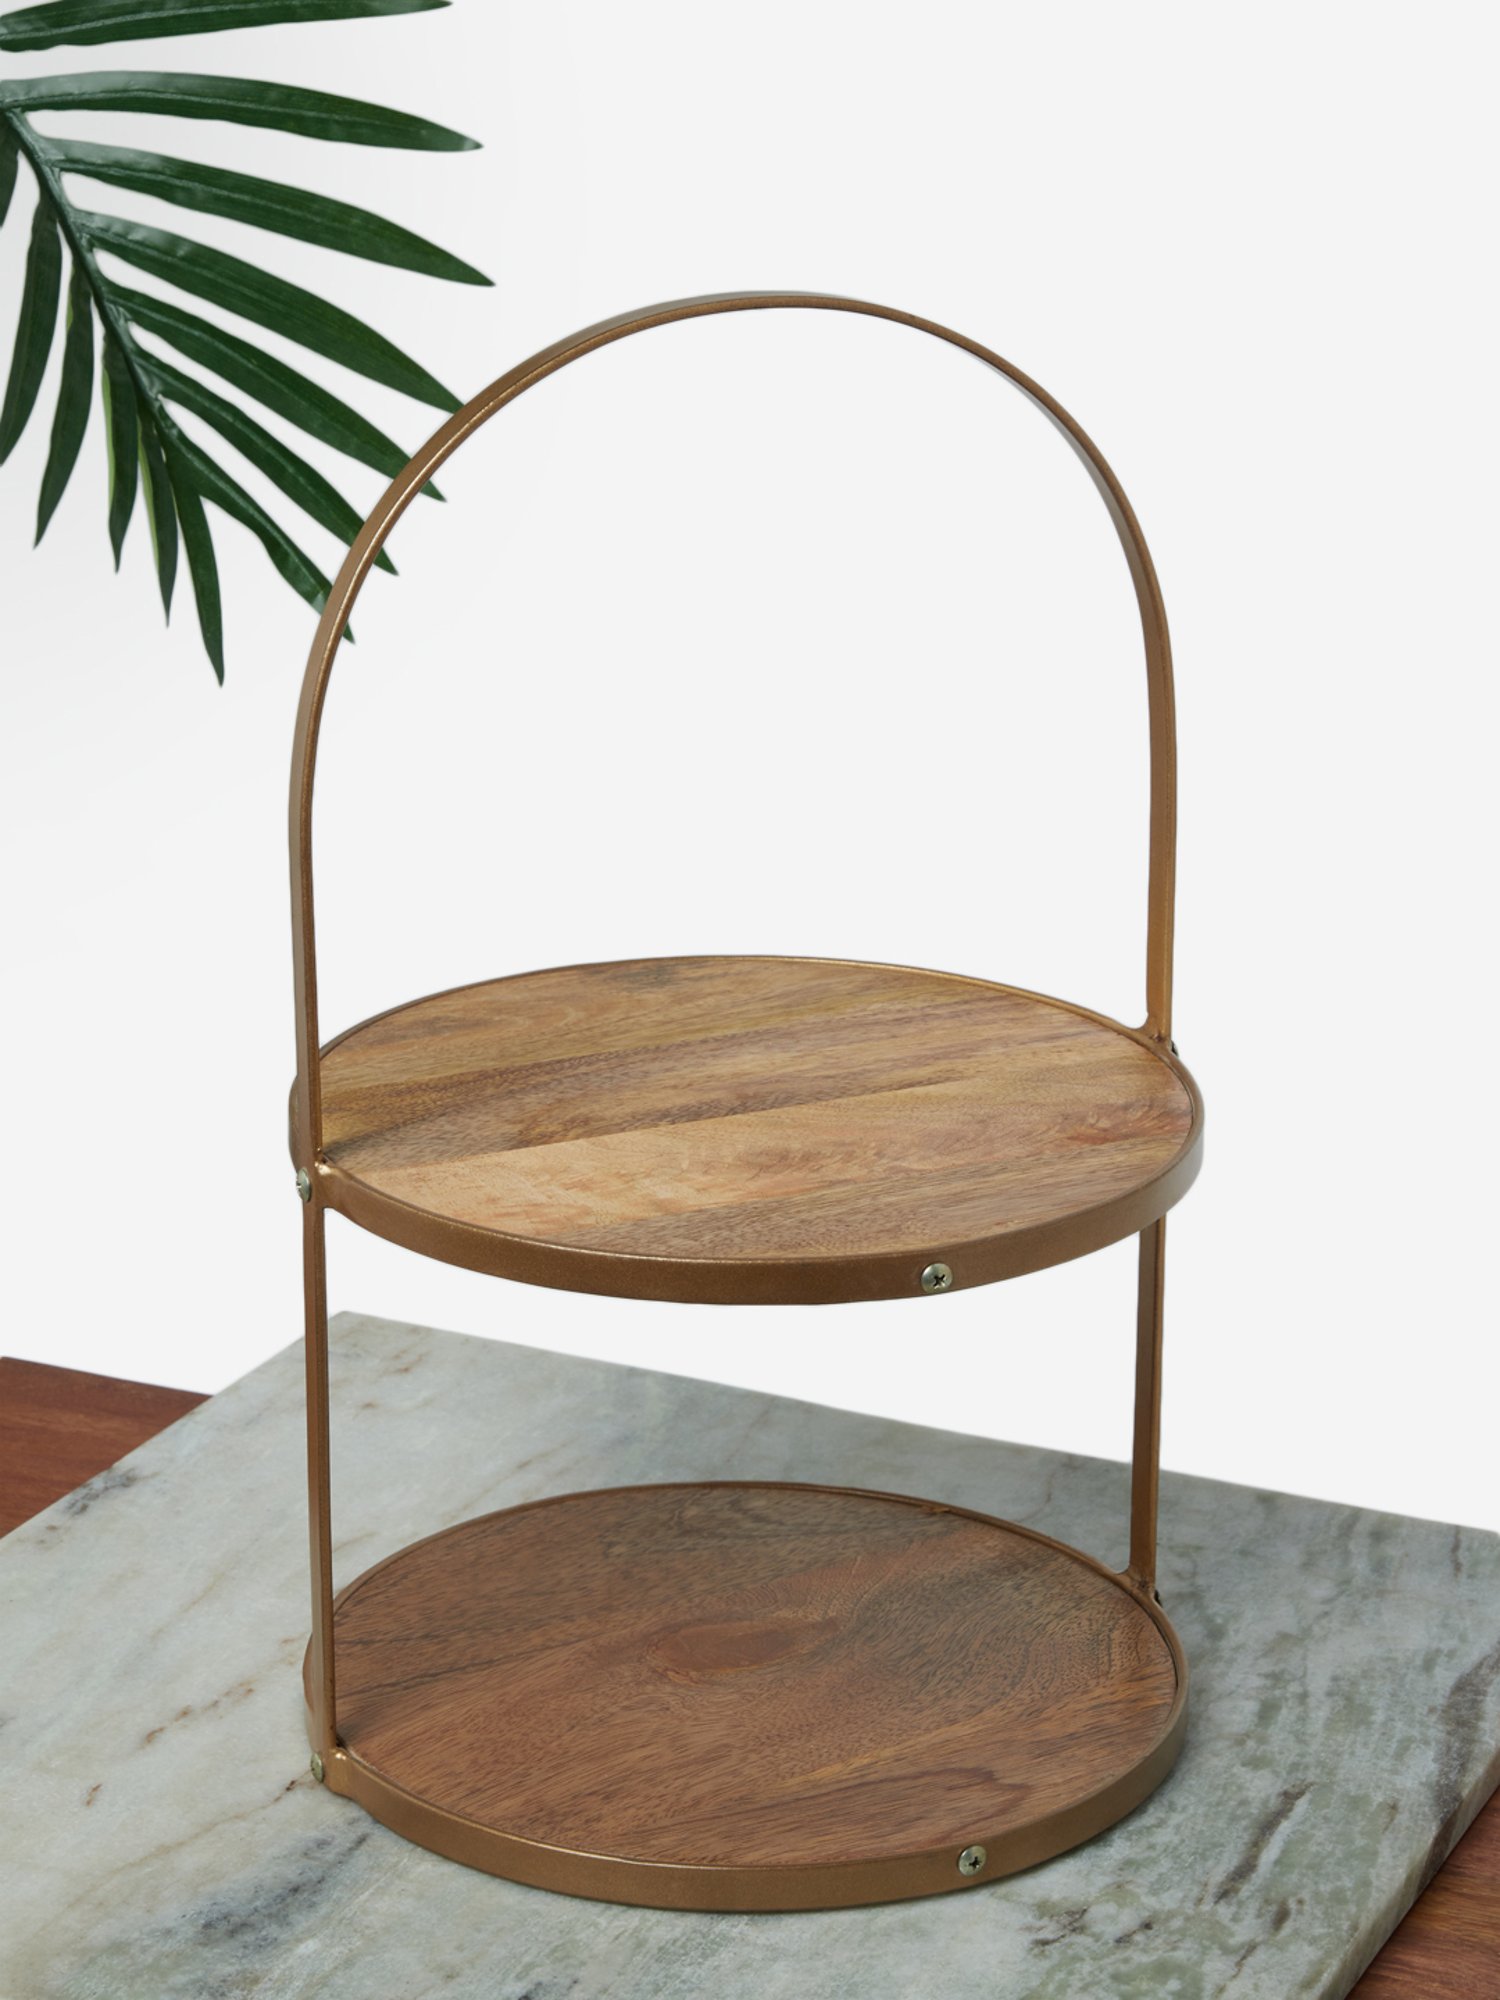 2 Tier Wooden Cake Stand - Brown – Folkulture India